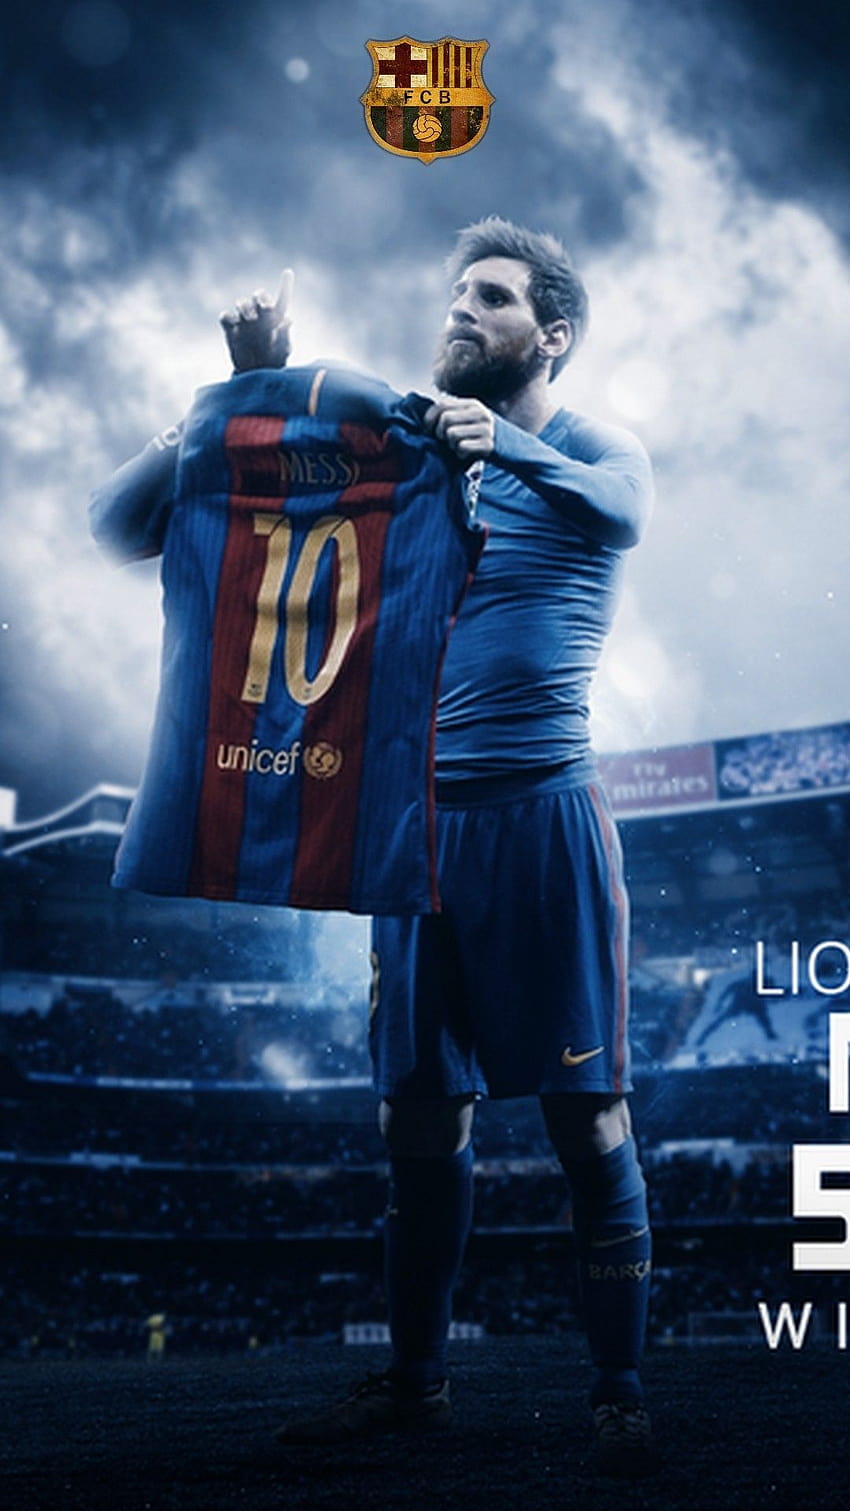 Leo Iphone posted by Samantha Tremblay, messi 10 iphone HD phone wallpaper